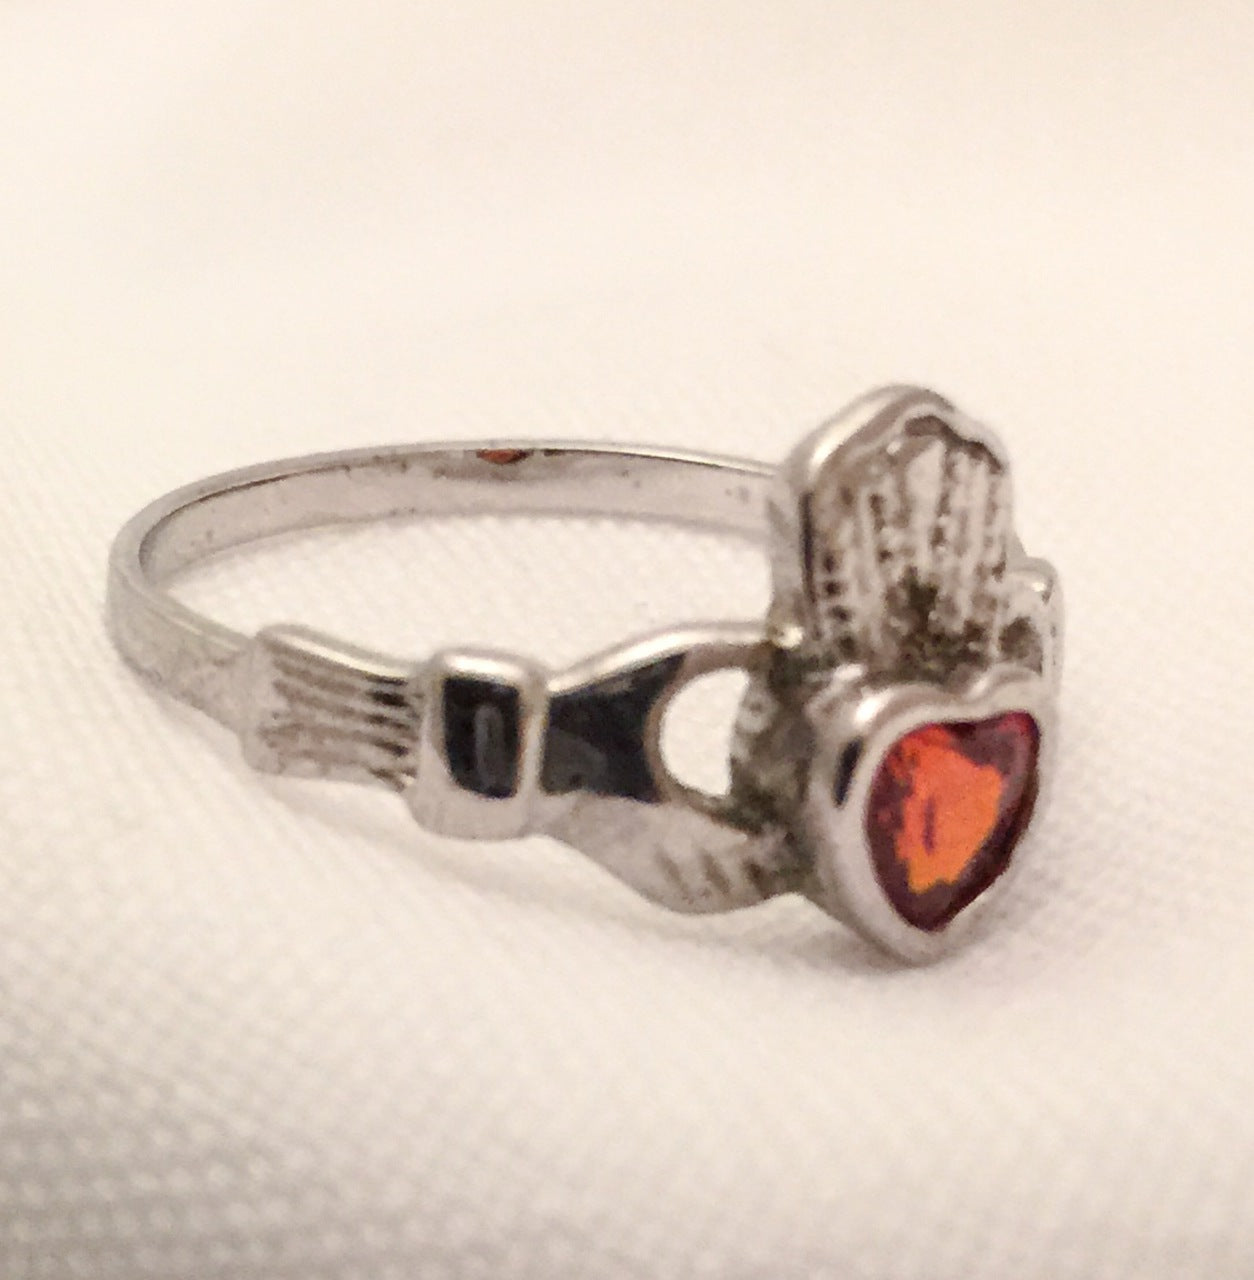 Vintage Claddagh Sterling Silver Ring with Red Stone Size 9